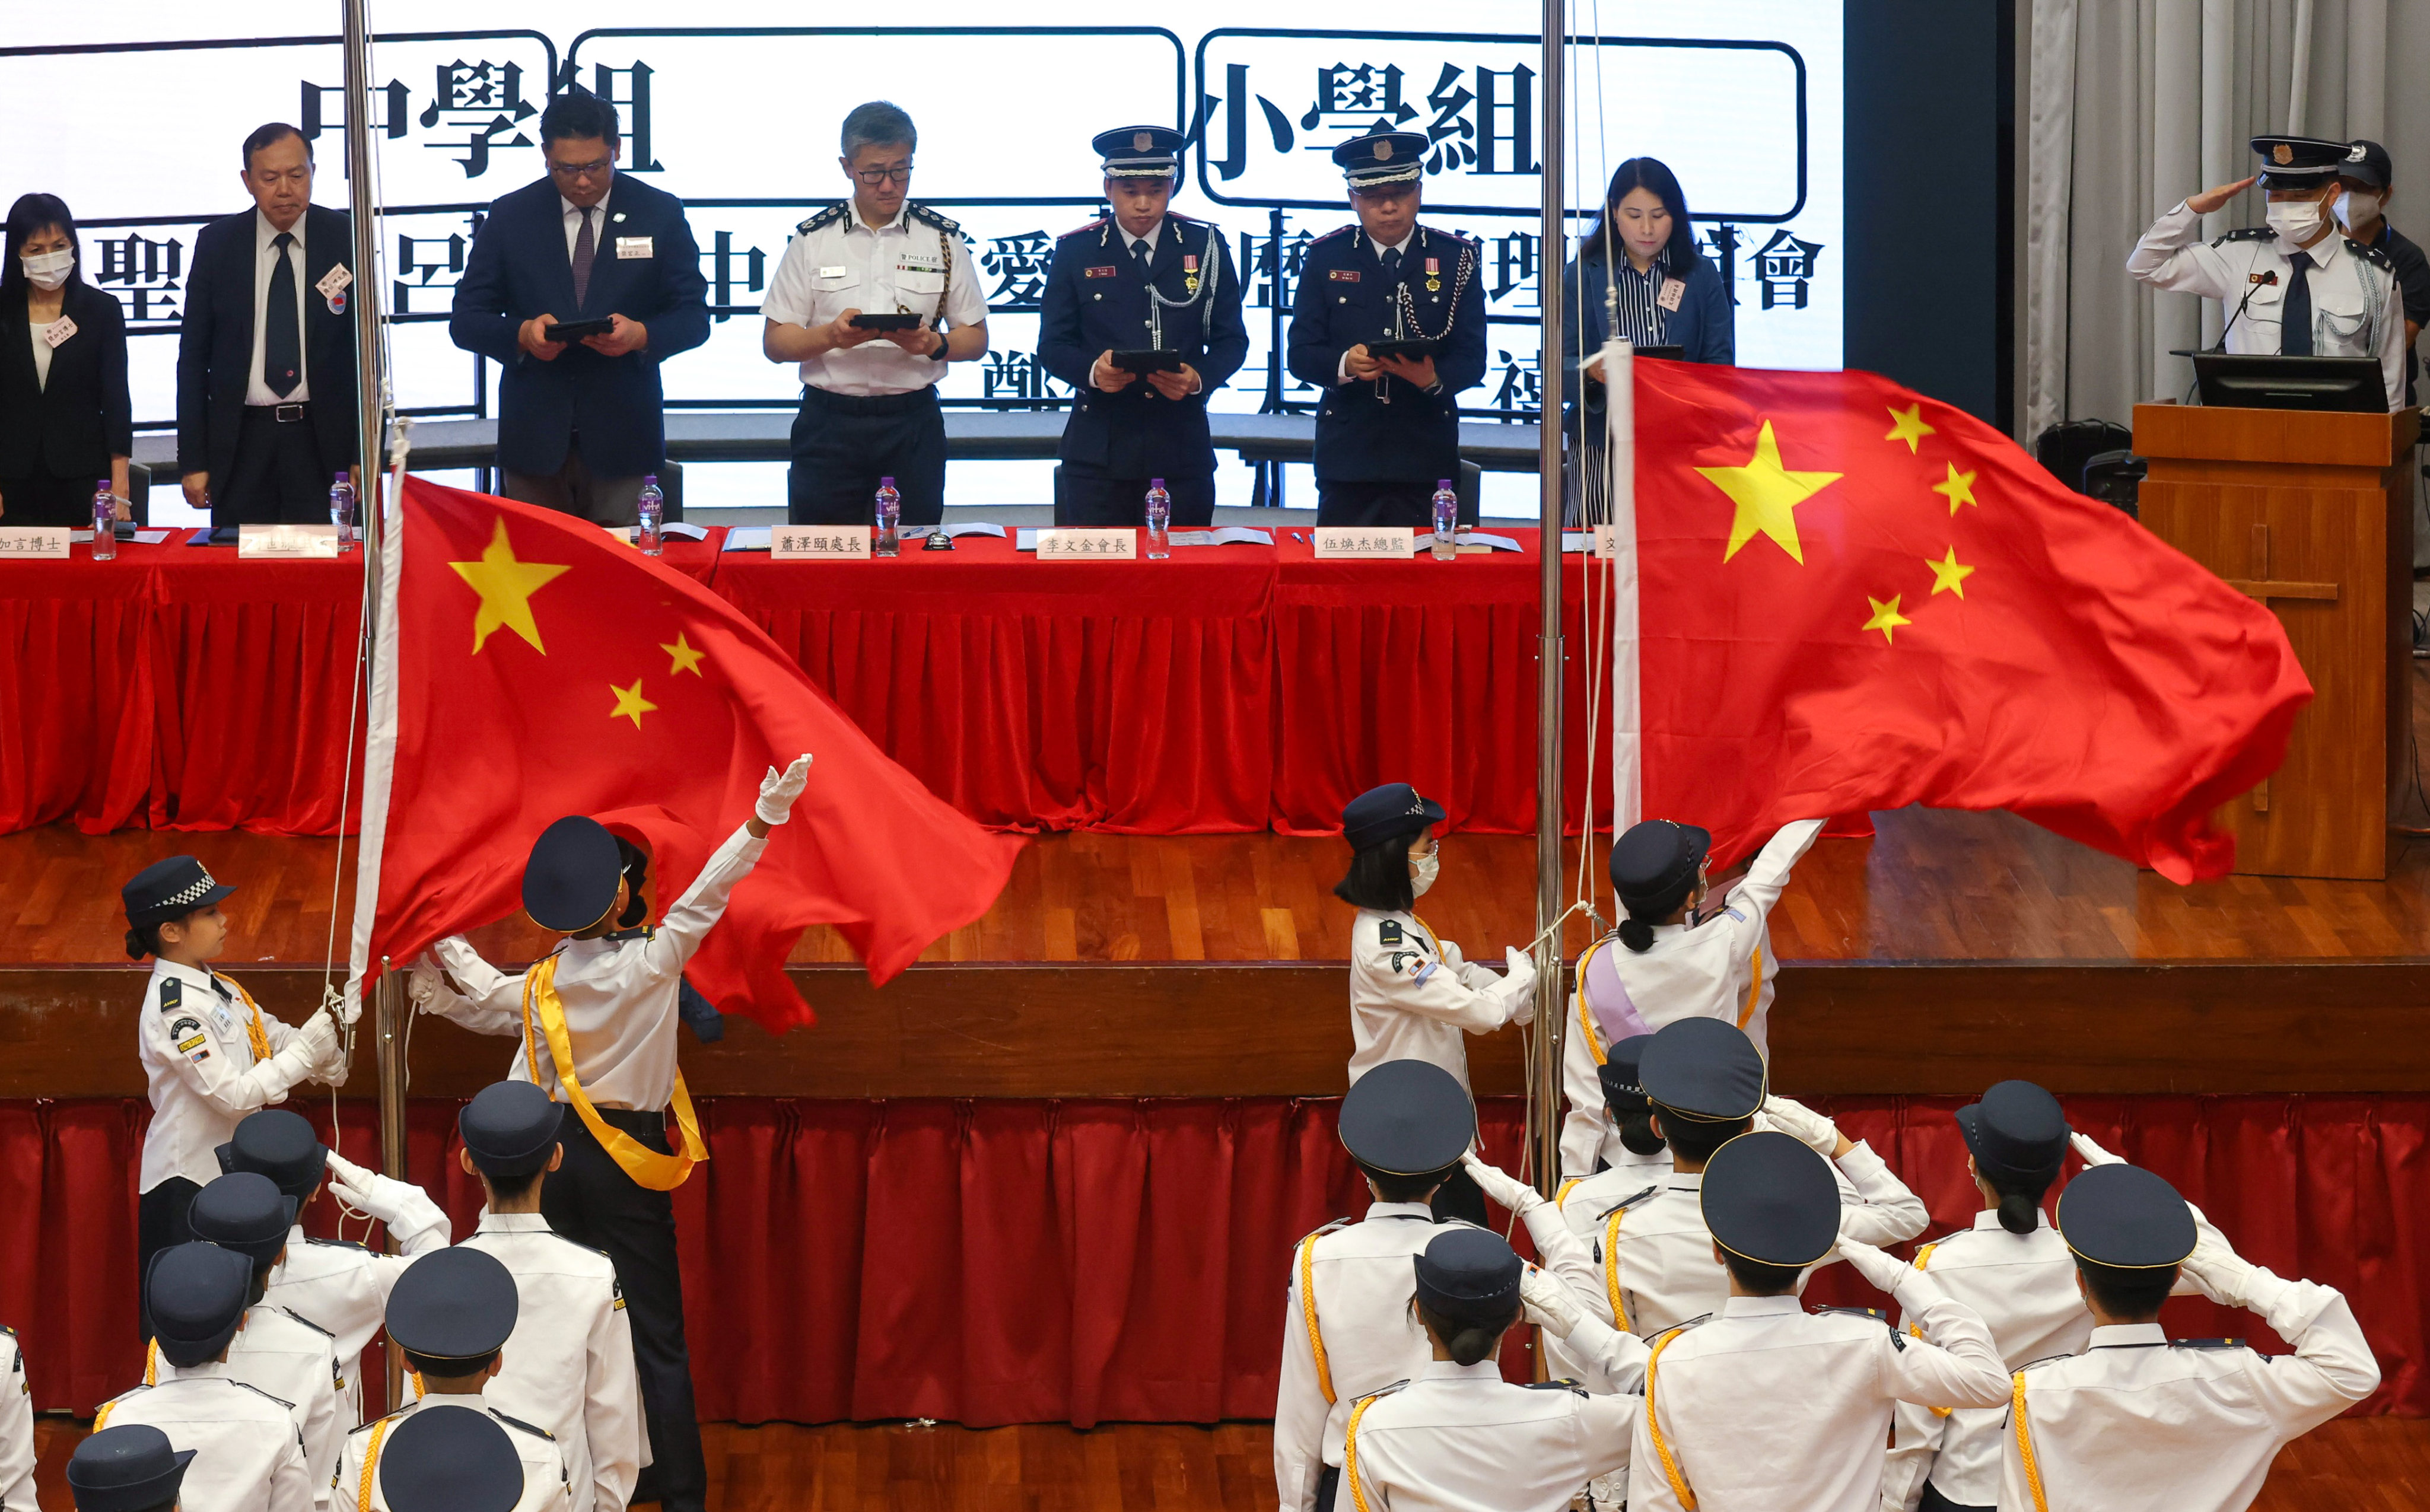 Students take part in a patriotic event in May, attended by Commissioner of Police Raymond Siu (centre left). Photo: Jonathan Wong